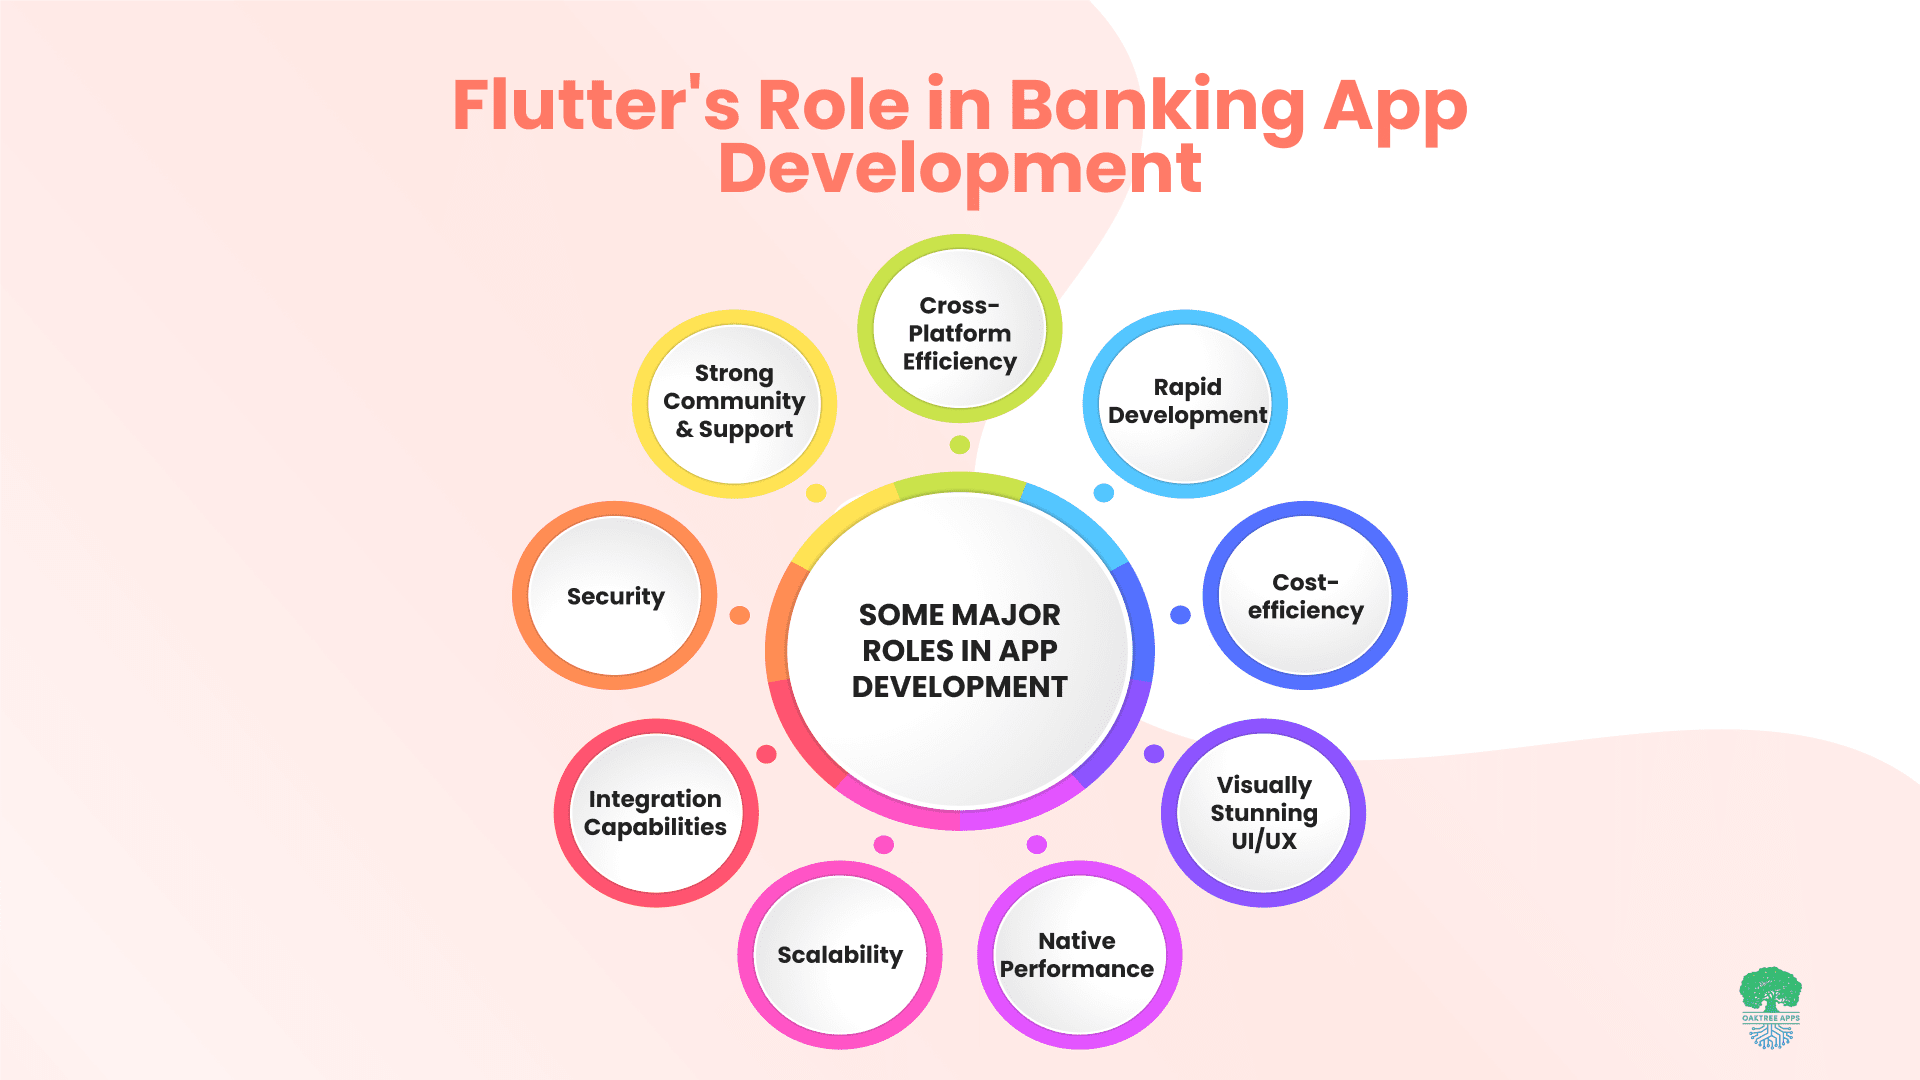 Role_of_flutter_in_banking_app_development.png